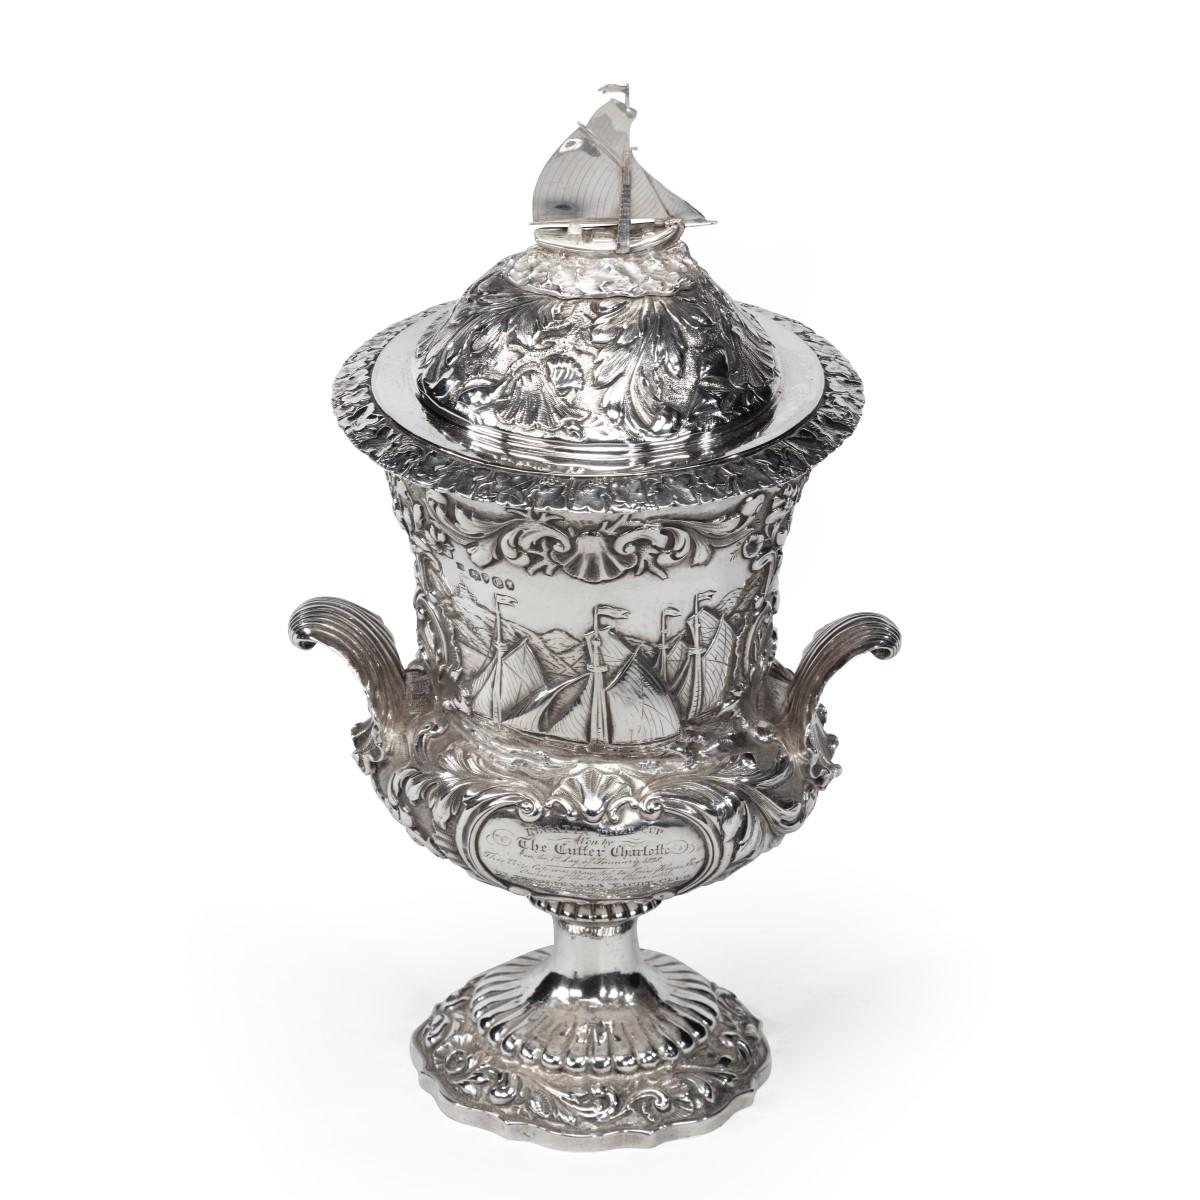 Mid-19th Century Silver and Silver-Gilt Sailing Regatta Trophy by Samuel Hayne and Dudley Cater